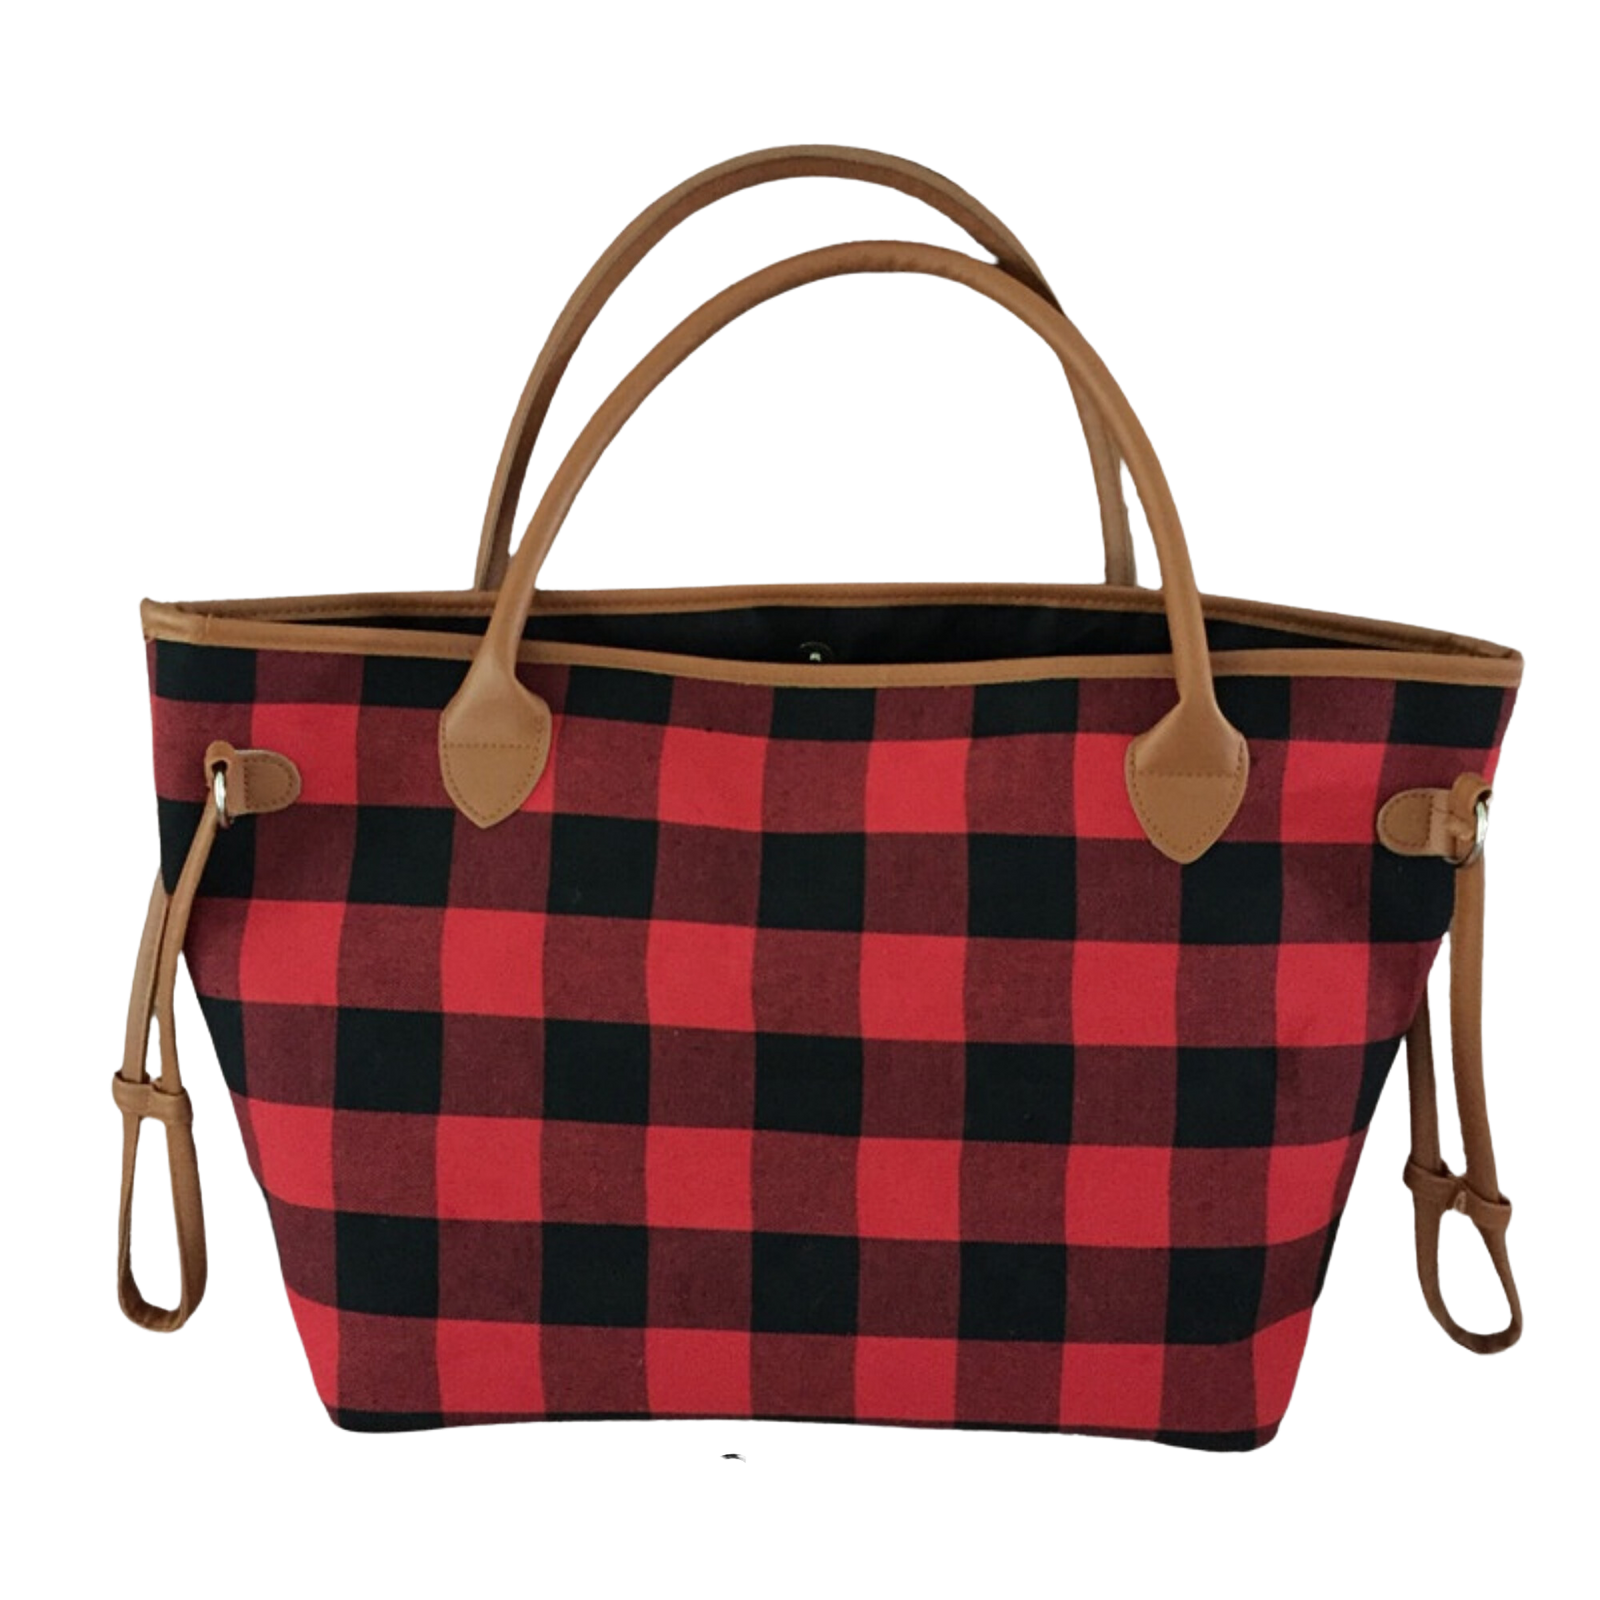 Meredith Tote Bag | Red Buffalo Plaid Tote Apparel & Accessories by The Rustic Redbud | The Rustic Redbud Boutique